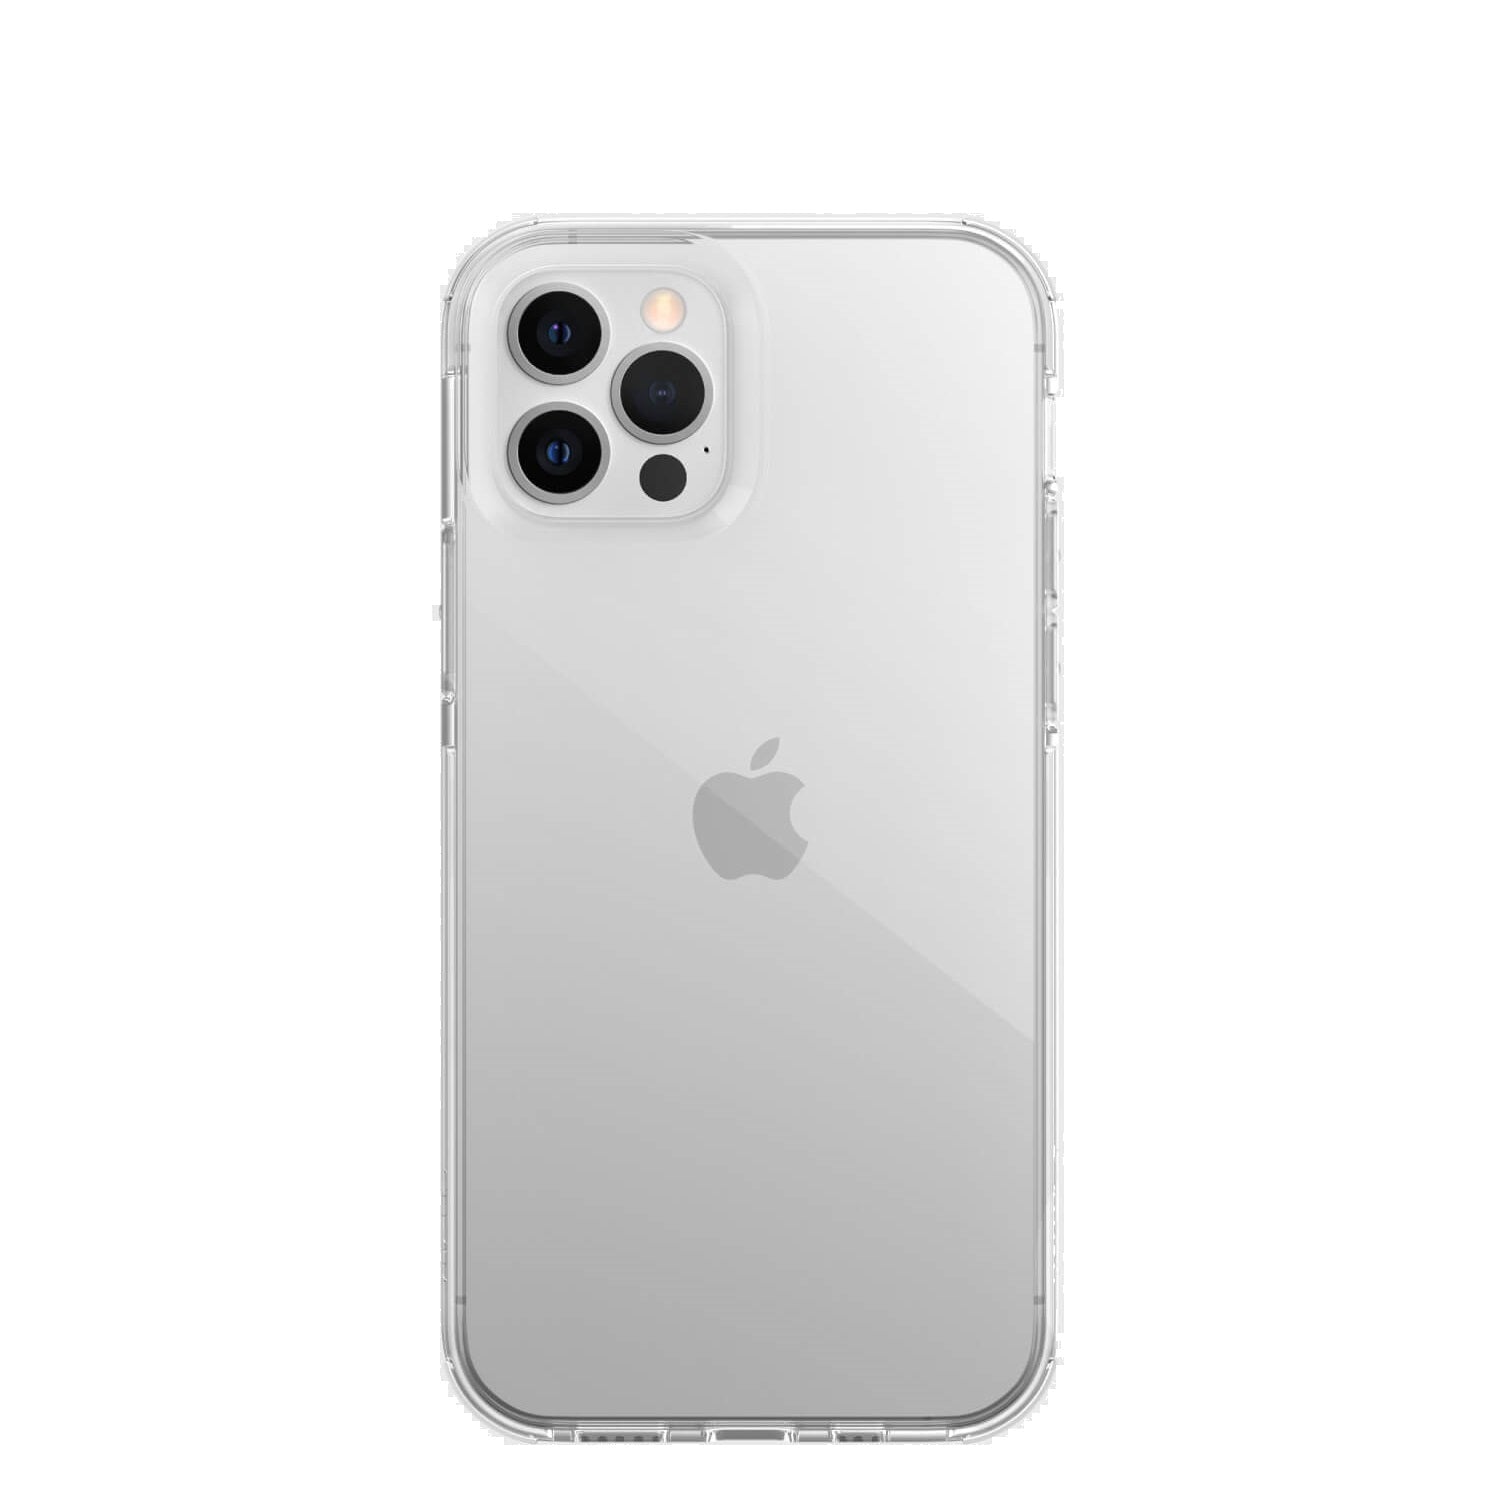  https://caserace.net/products/x-doria-defense-clear-back-cover-for-iphone-iphone-12-mini-6-7-clear